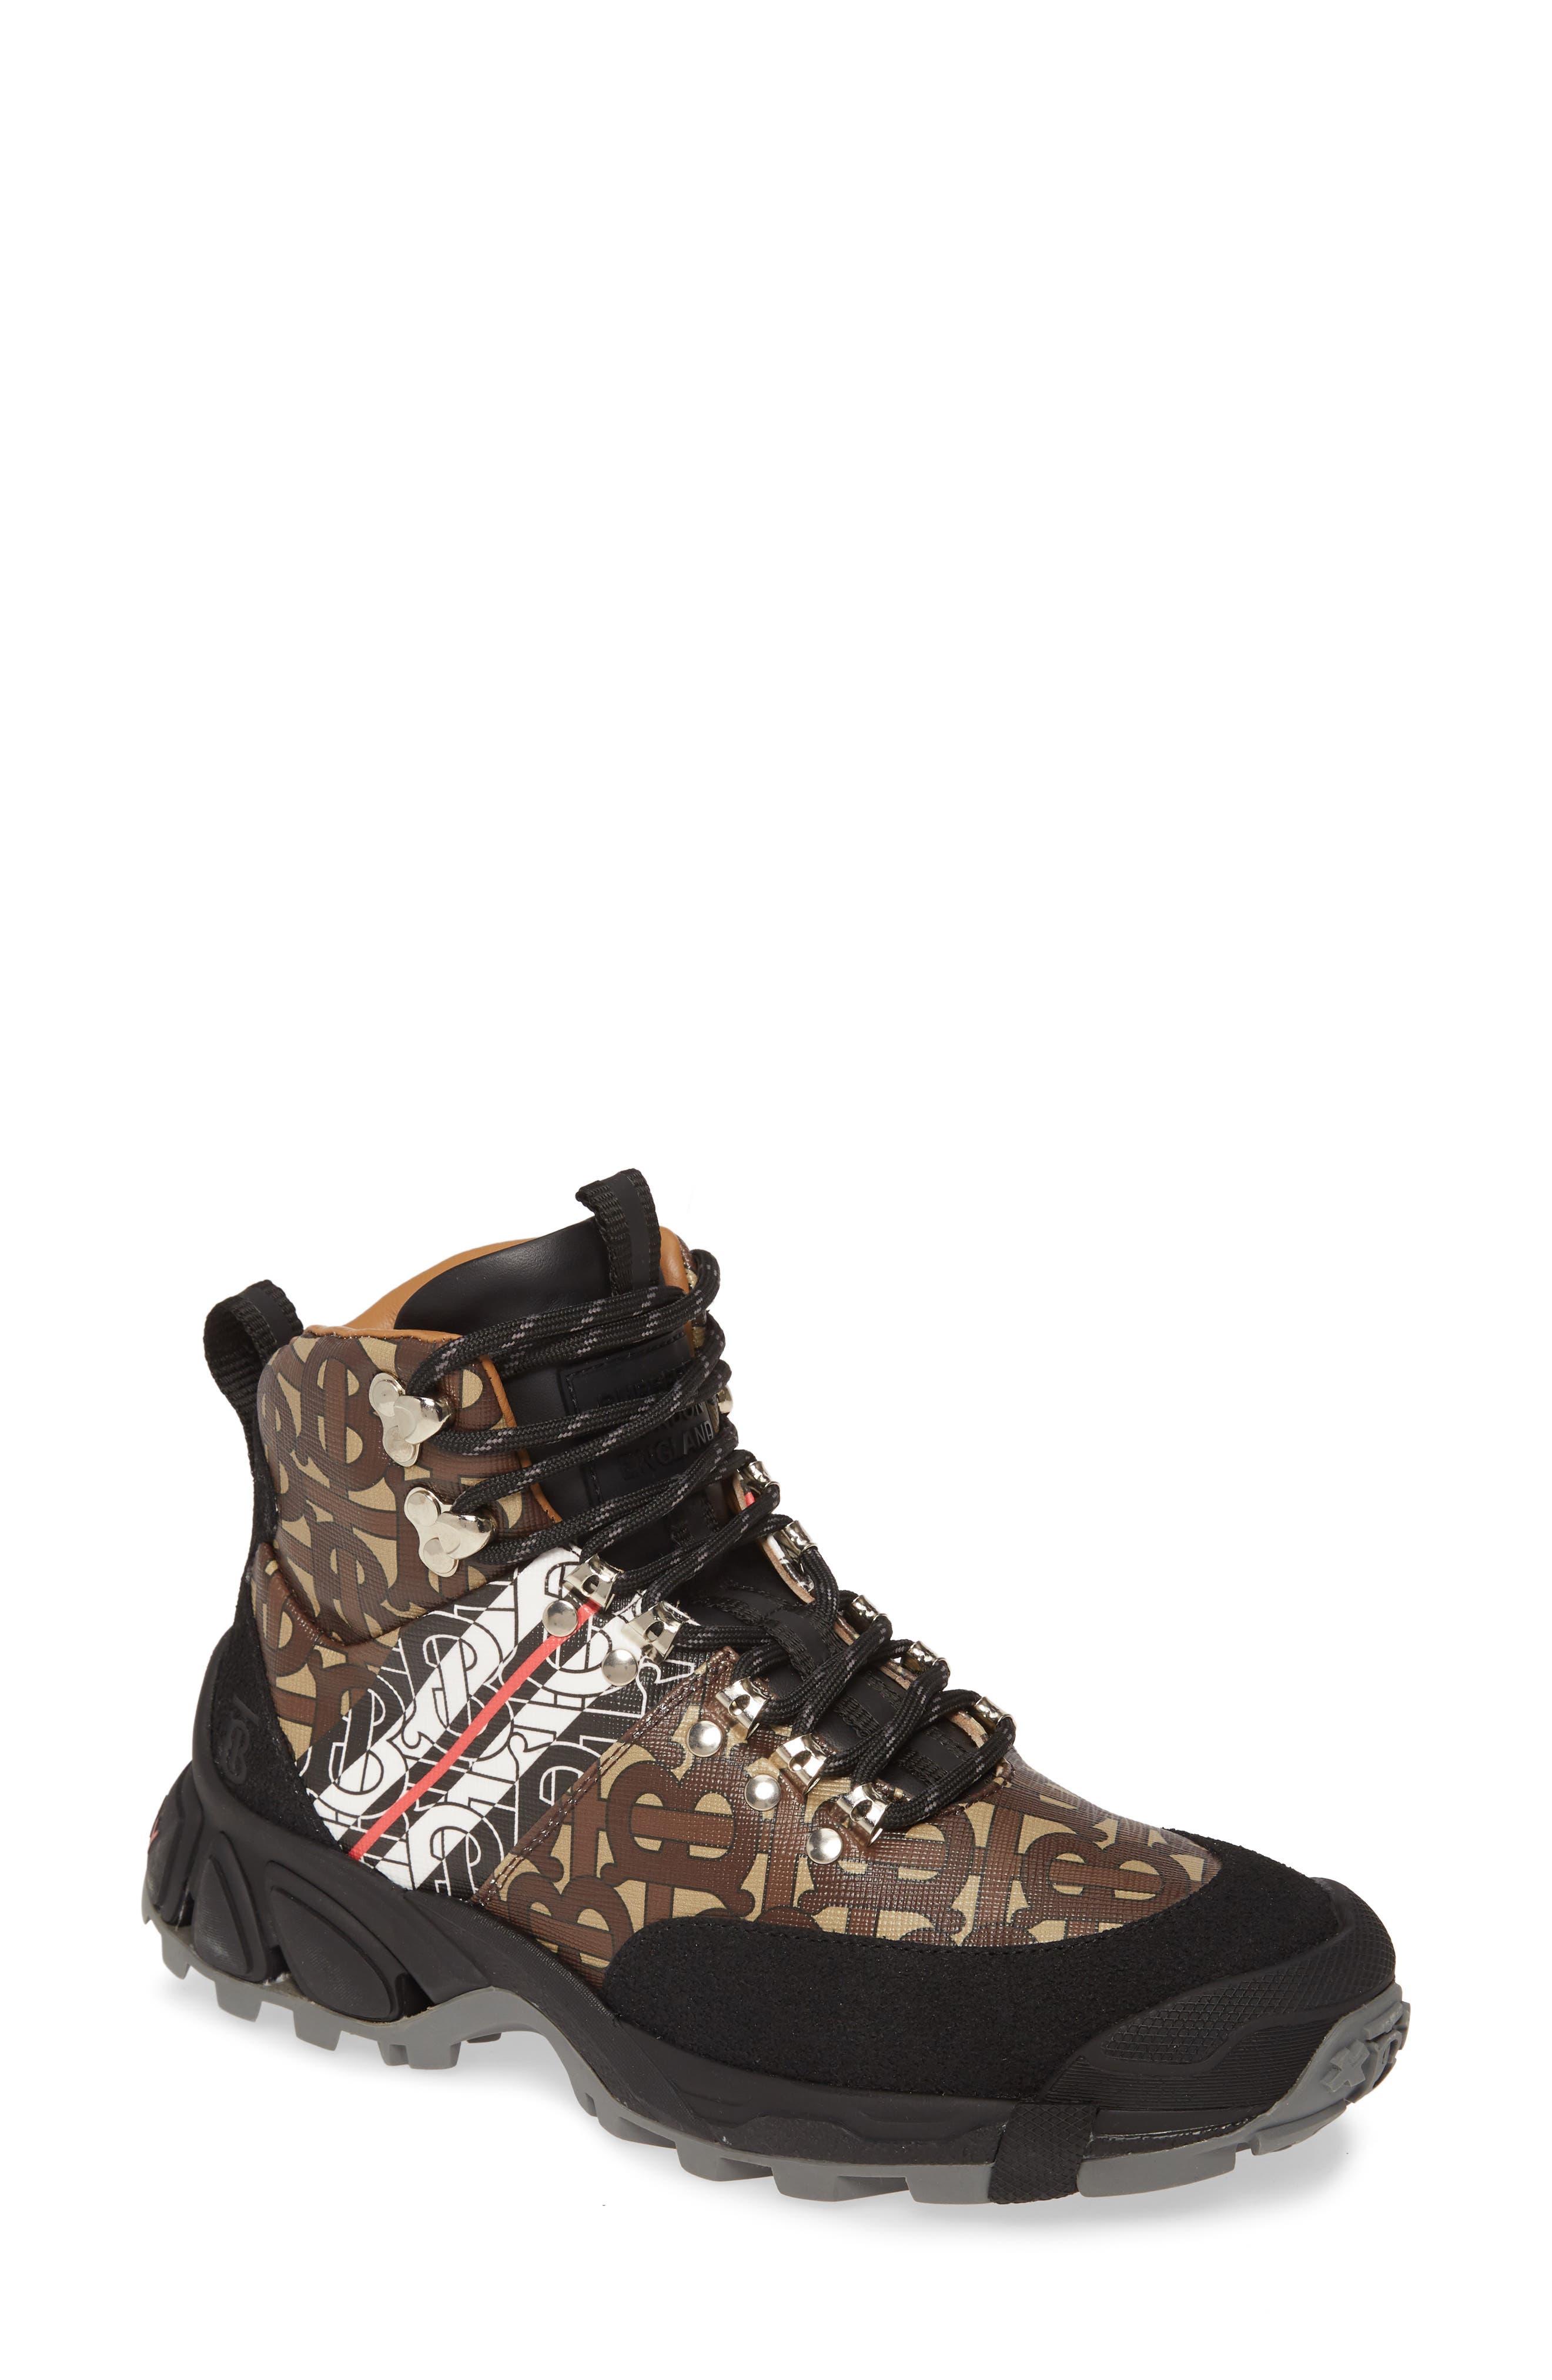 burberry boots nordstrom